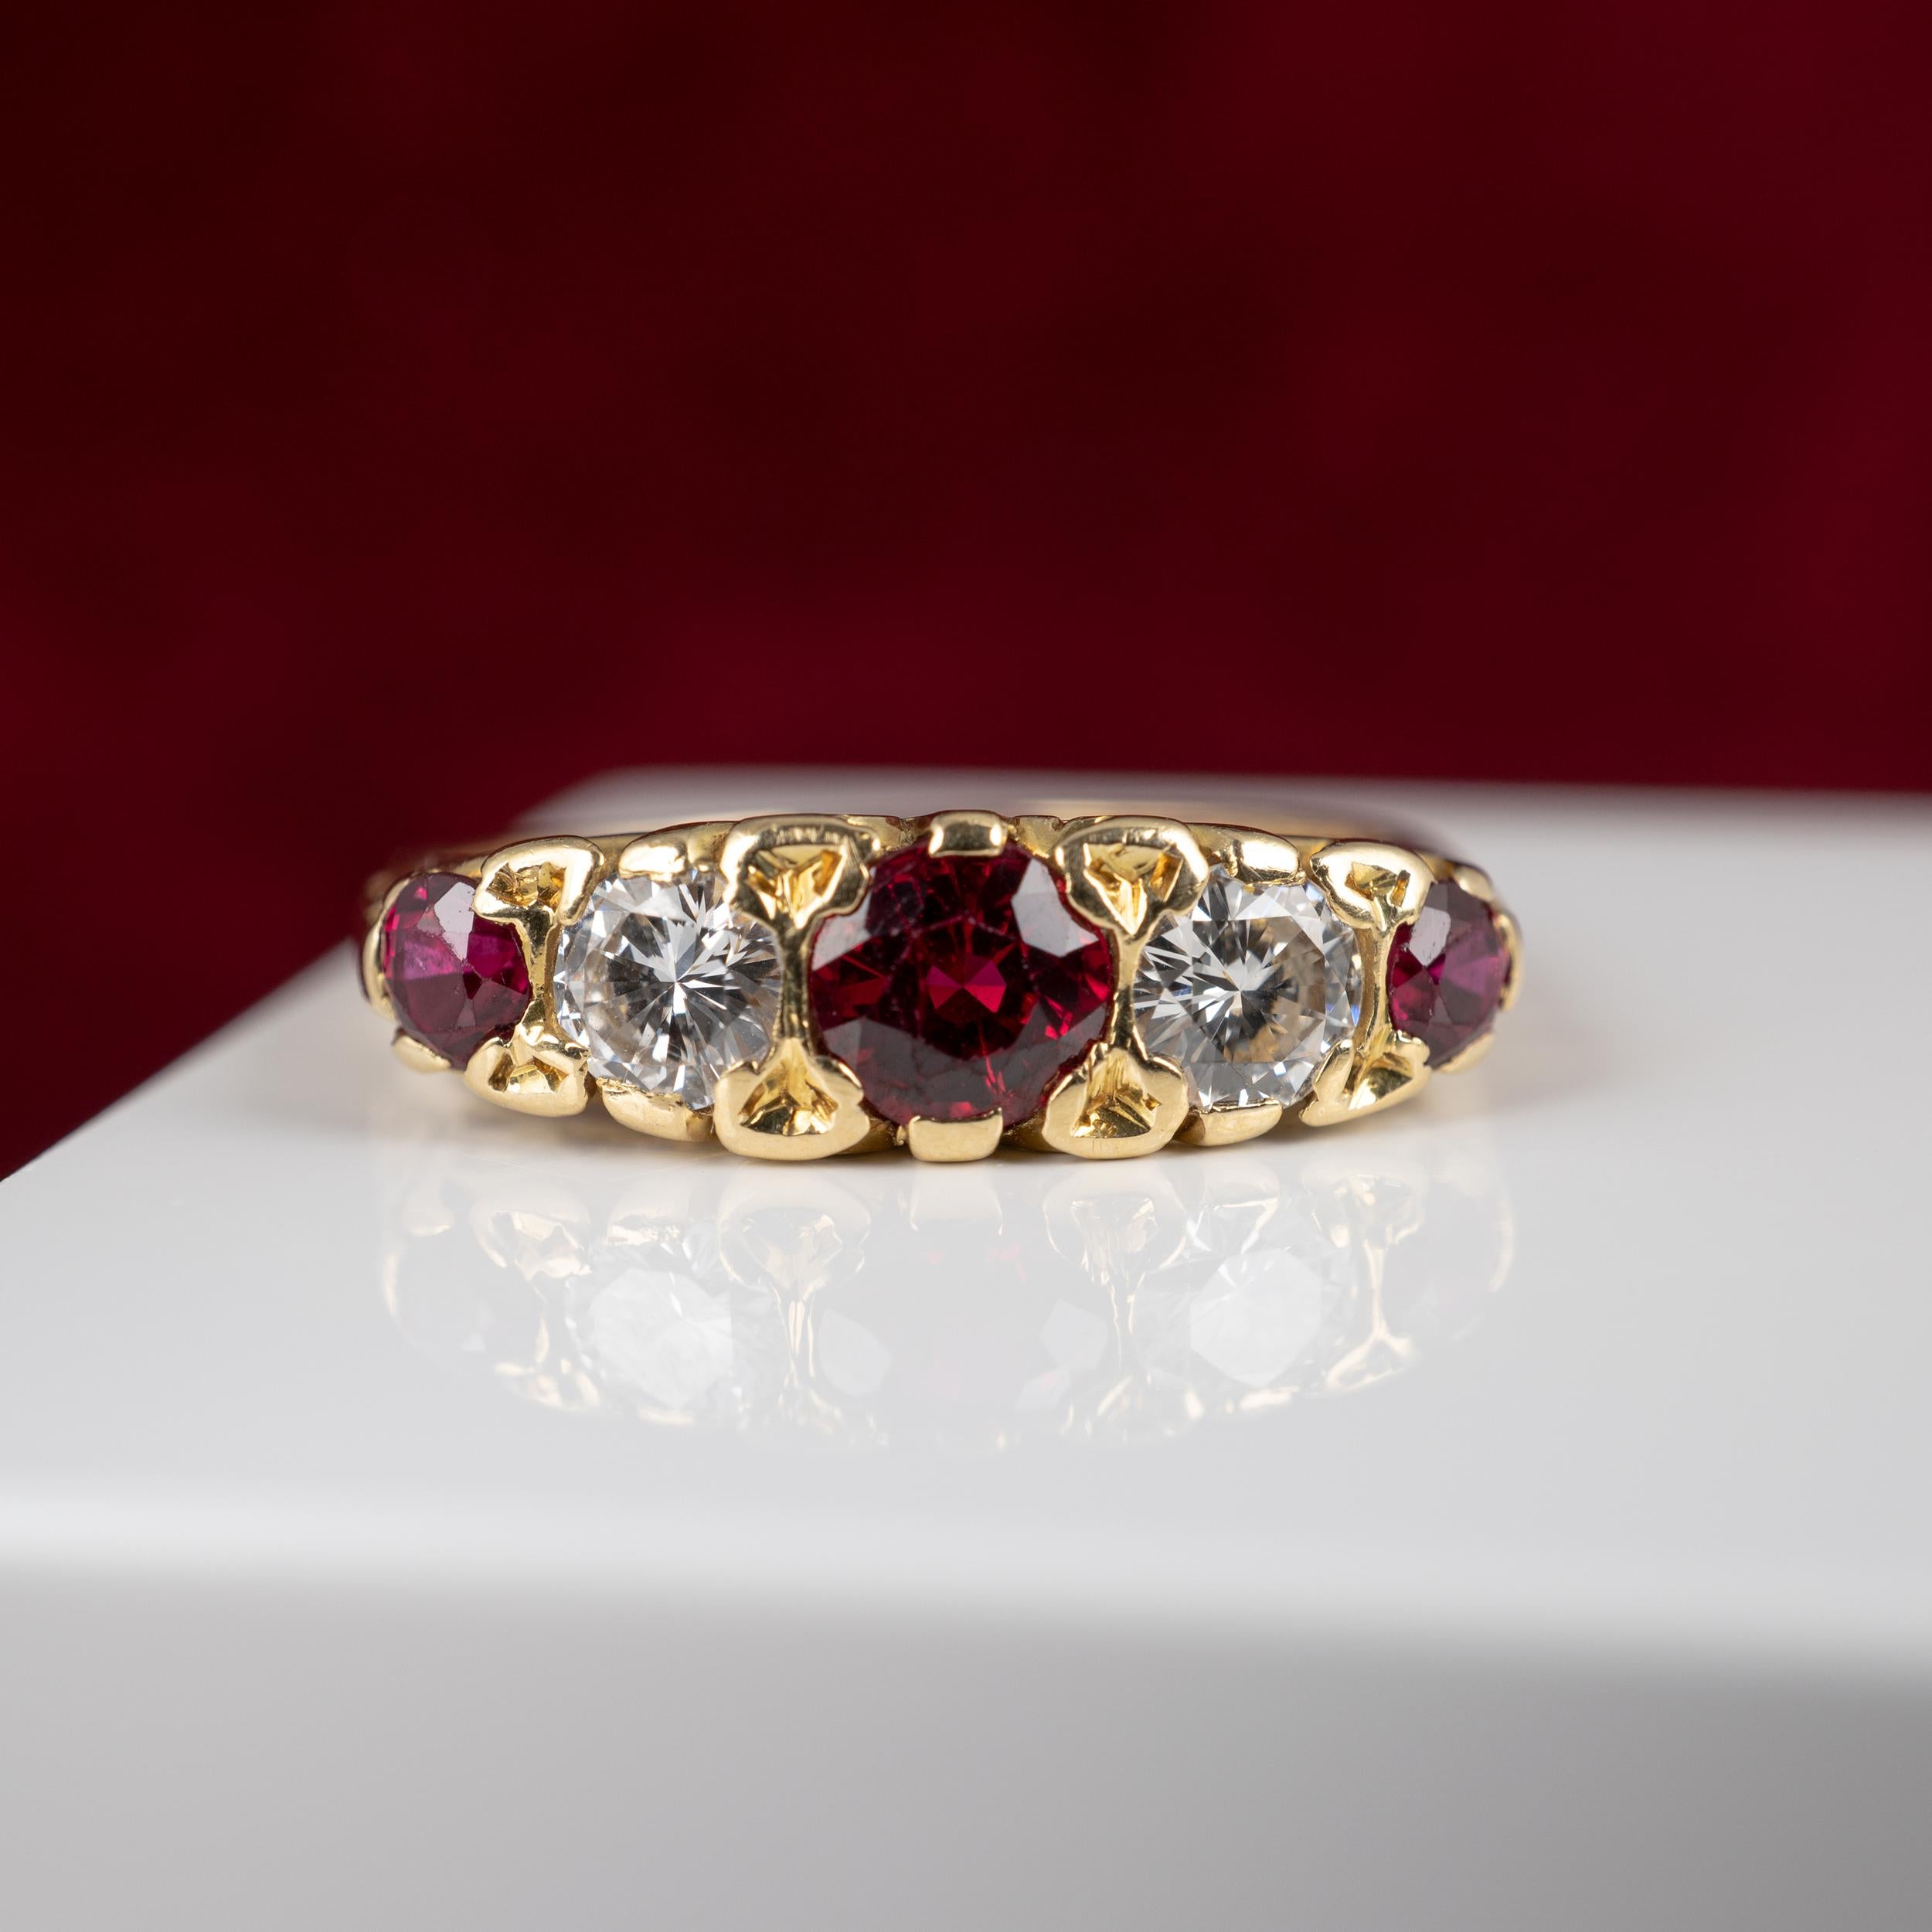 A fine quality ruby diamond band ring surmounted with 1.10 carats of the most gorgeous rubies and complimenting diamonds set within a scroll worked setting. The classic style ring is fully hallmarked and dated London 1974 and in fabulous